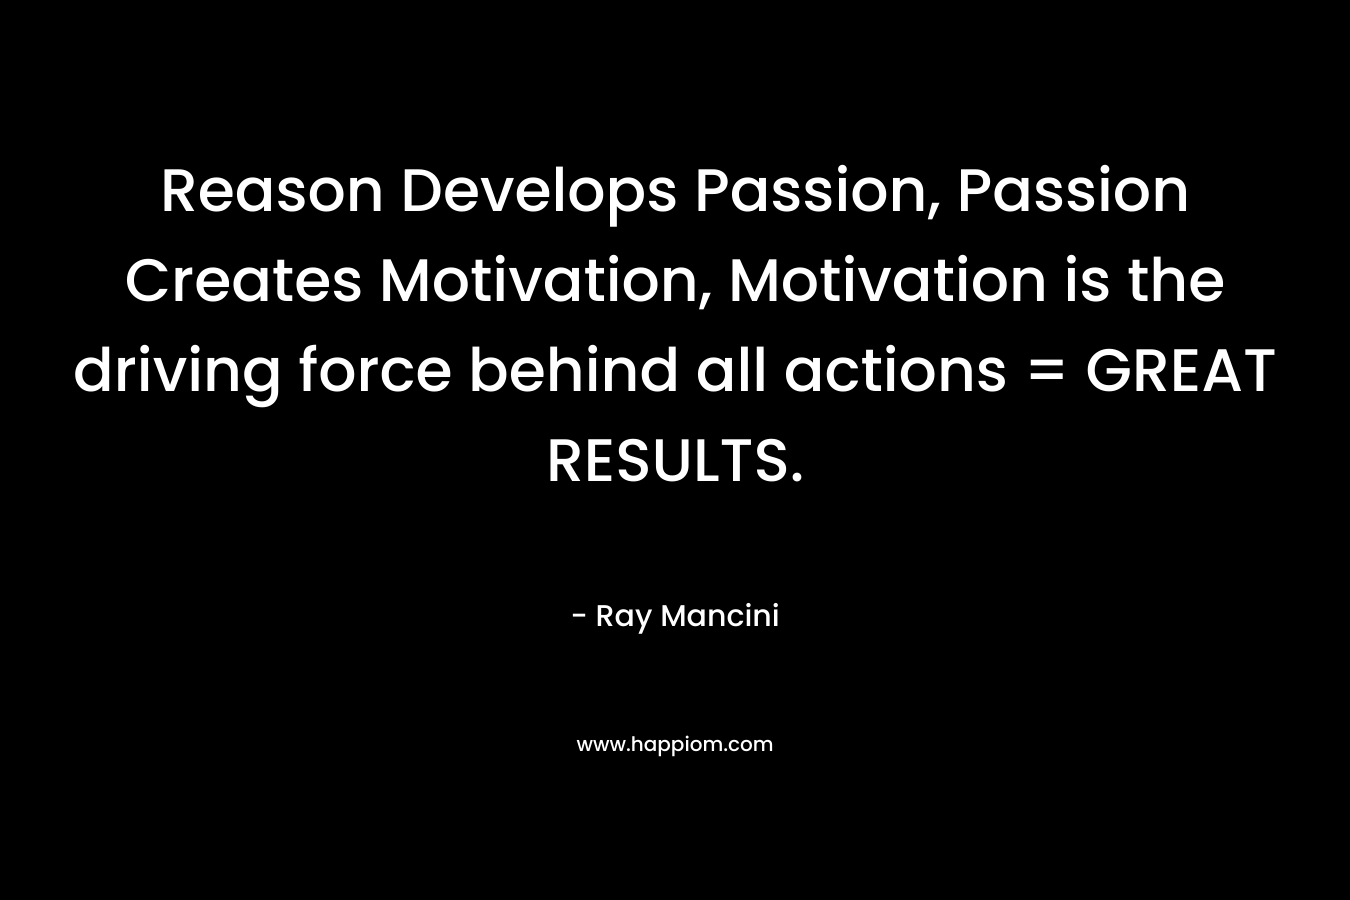 Reason Develops Passion, Passion Creates Motivation, Motivation is the driving force behind all actions = GREAT RESULTS. – Ray Mancini